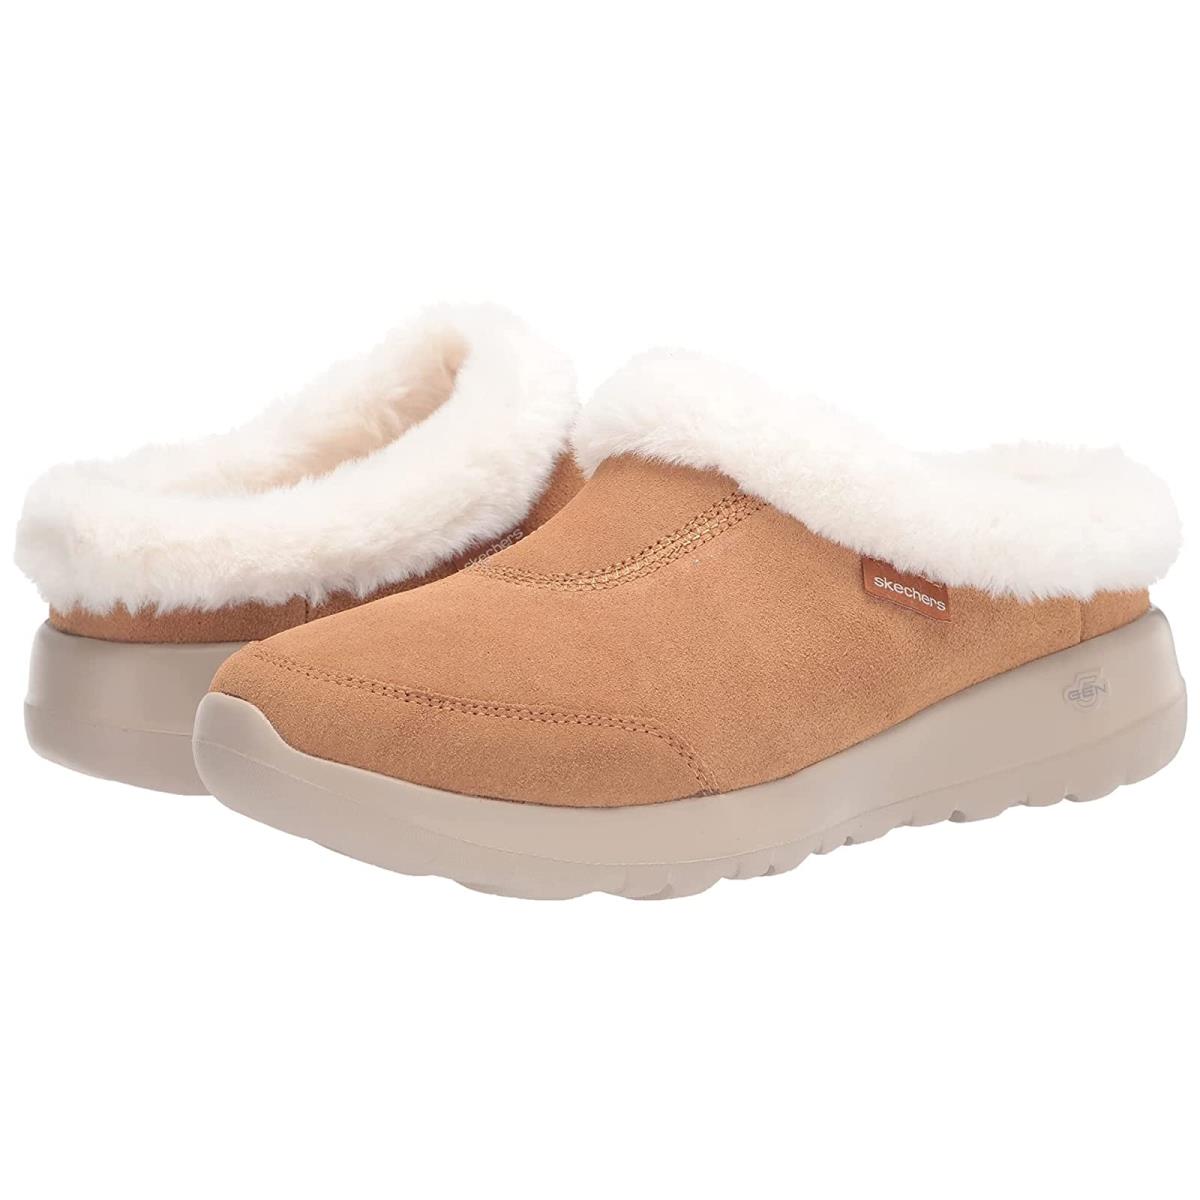 Woman`s Sneakers Athletic Shoes Skechers Performance On-the-go Joy - Cozy Chestnut